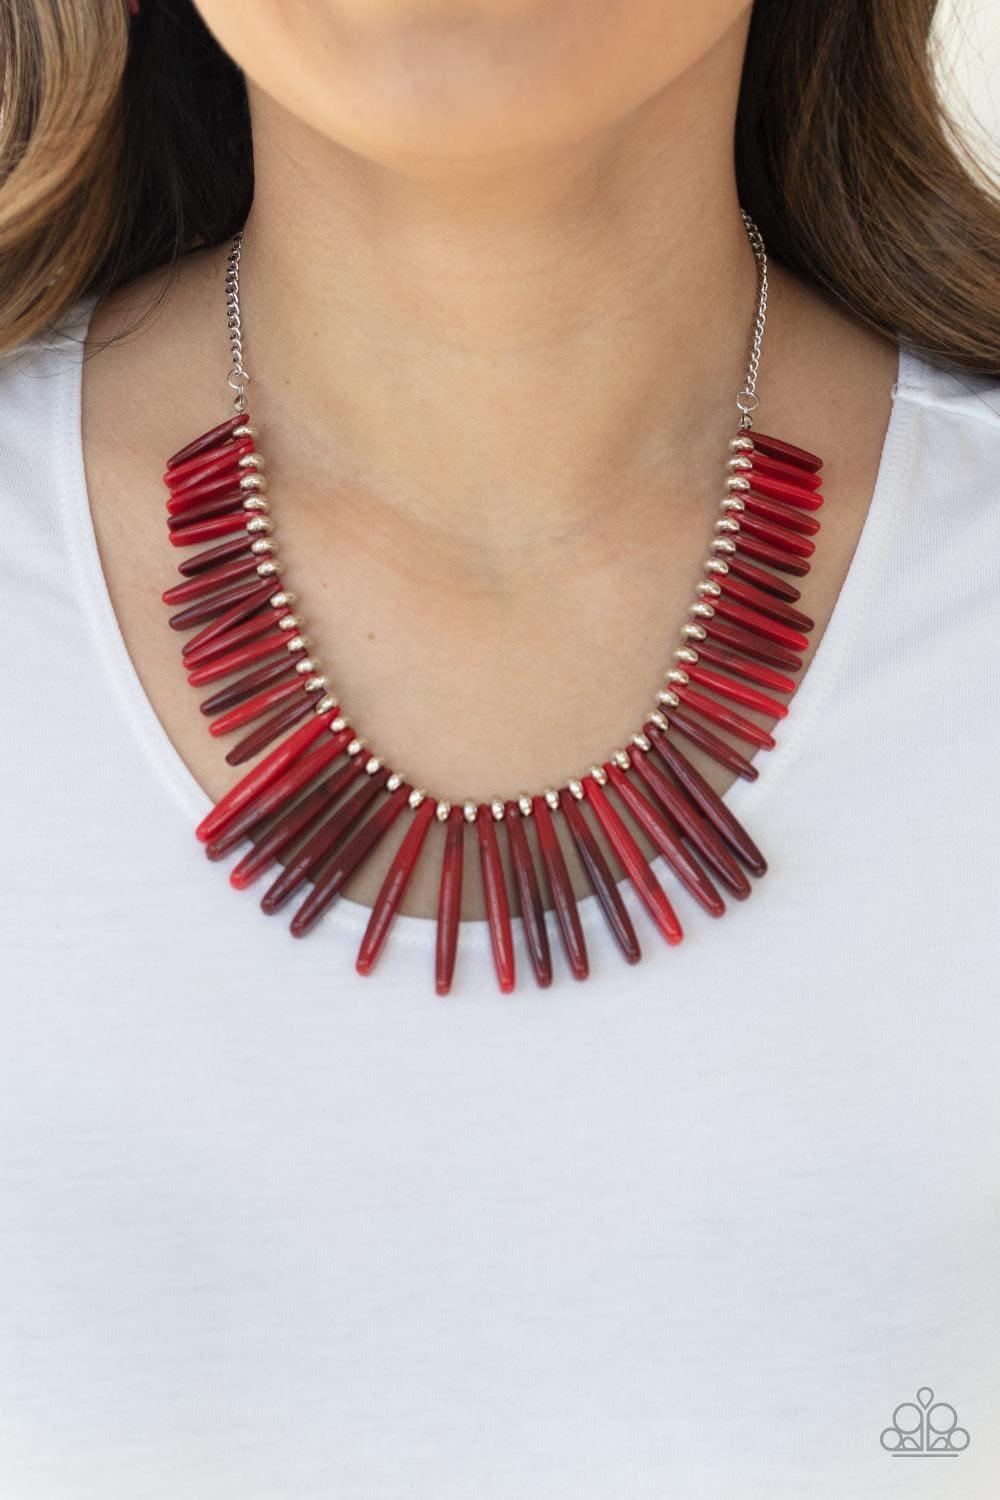 Paparazzi Accessories - Out Of My Element - Red Necklace - Bling by JessieK